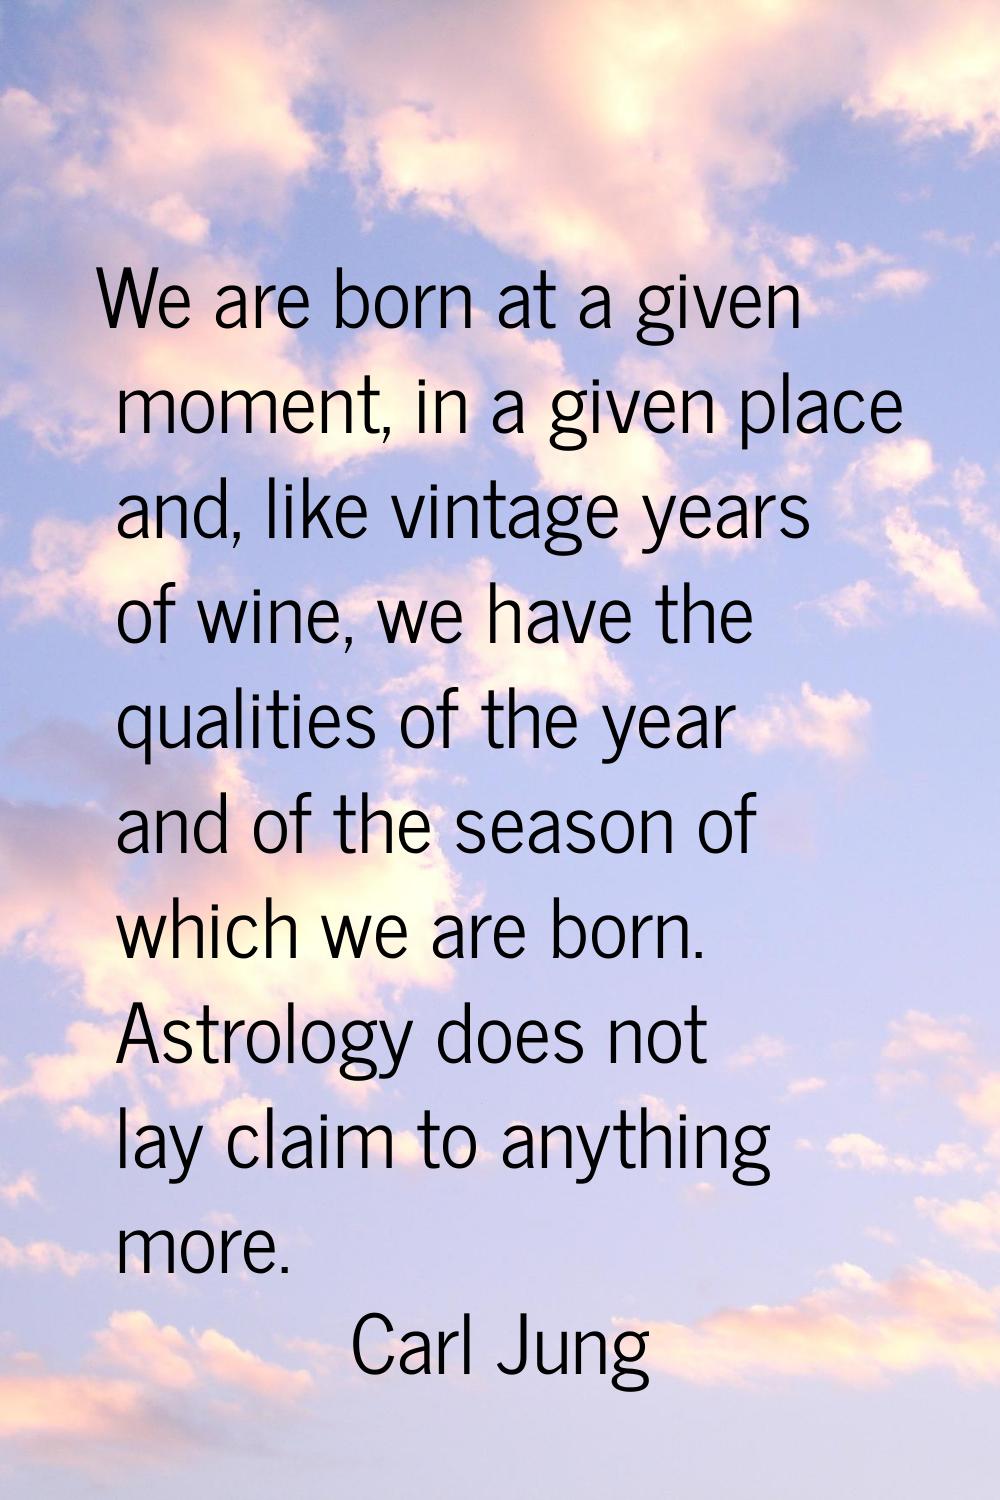 We are born at a given moment, in a given place and, like vintage years of wine, we have the qualit